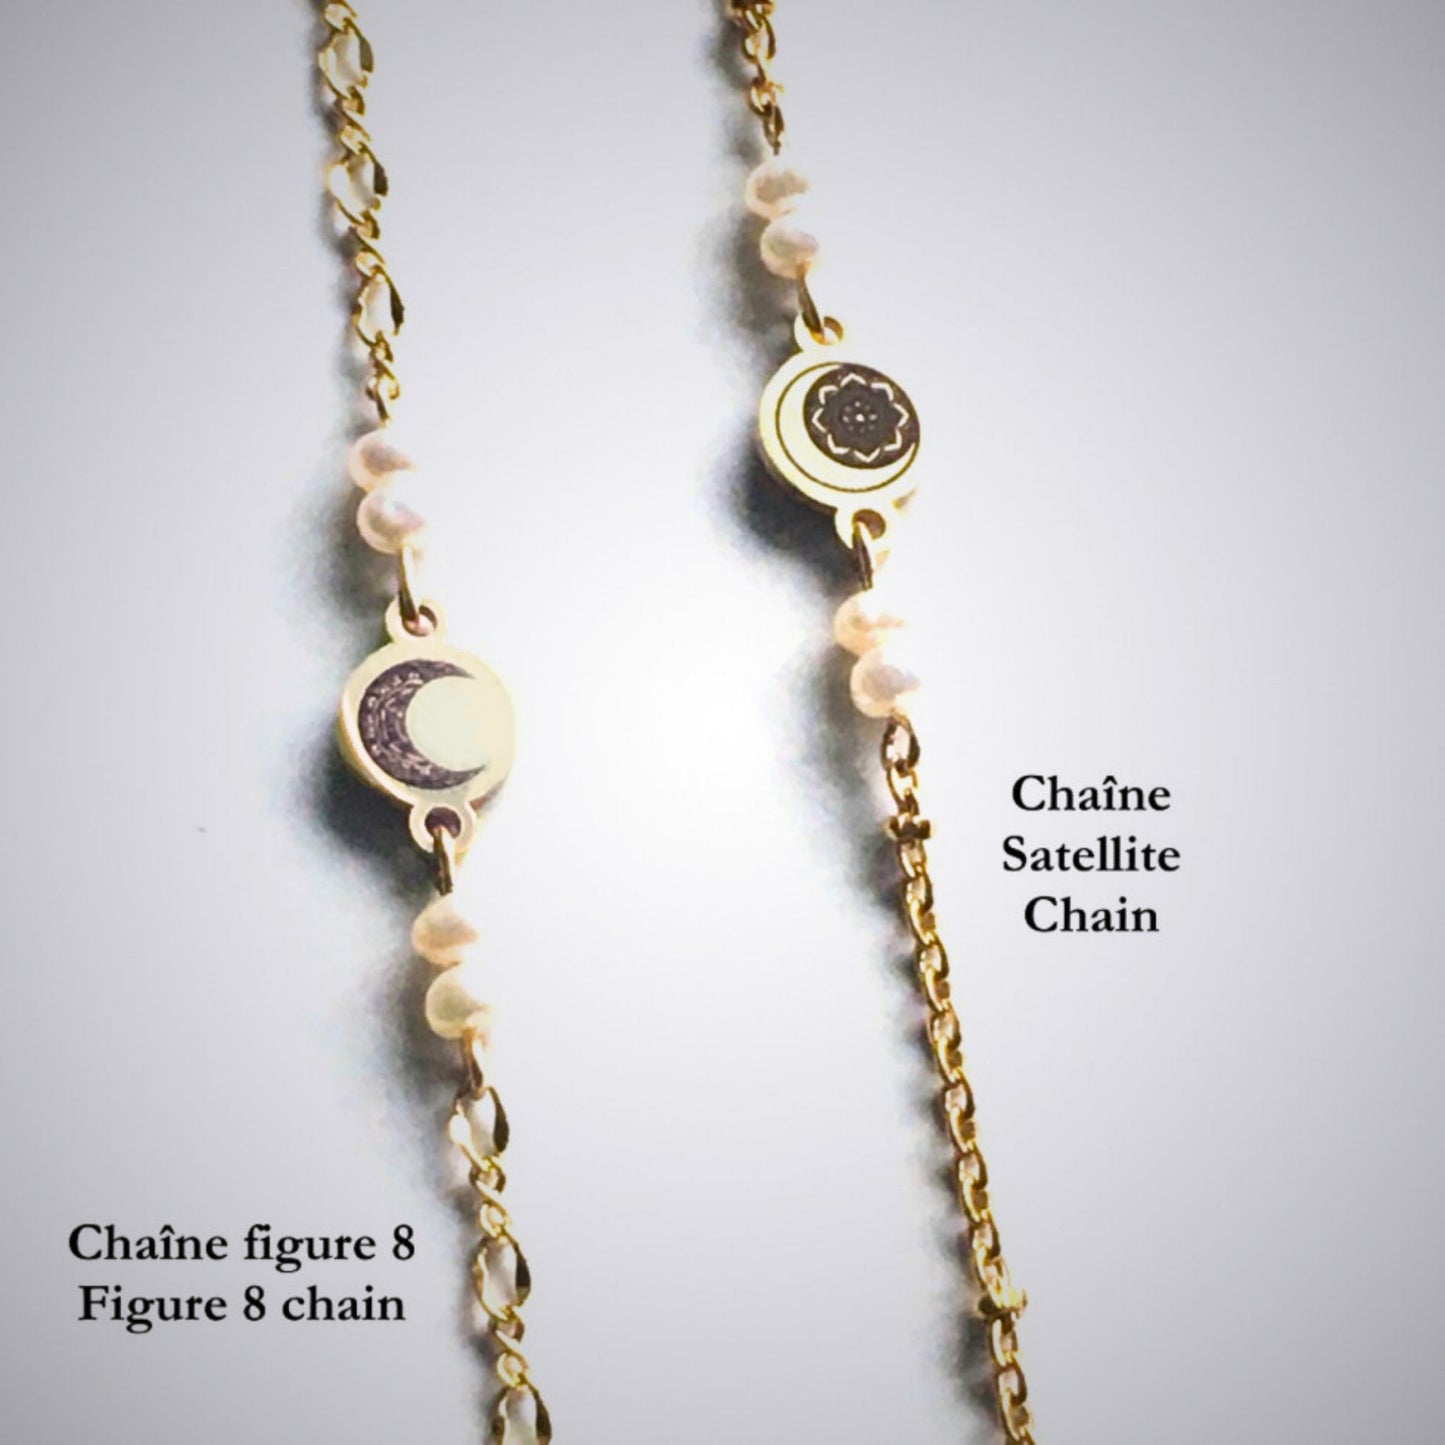 Bracelet - Golden chain - Genuine Pearls - Choose your chain